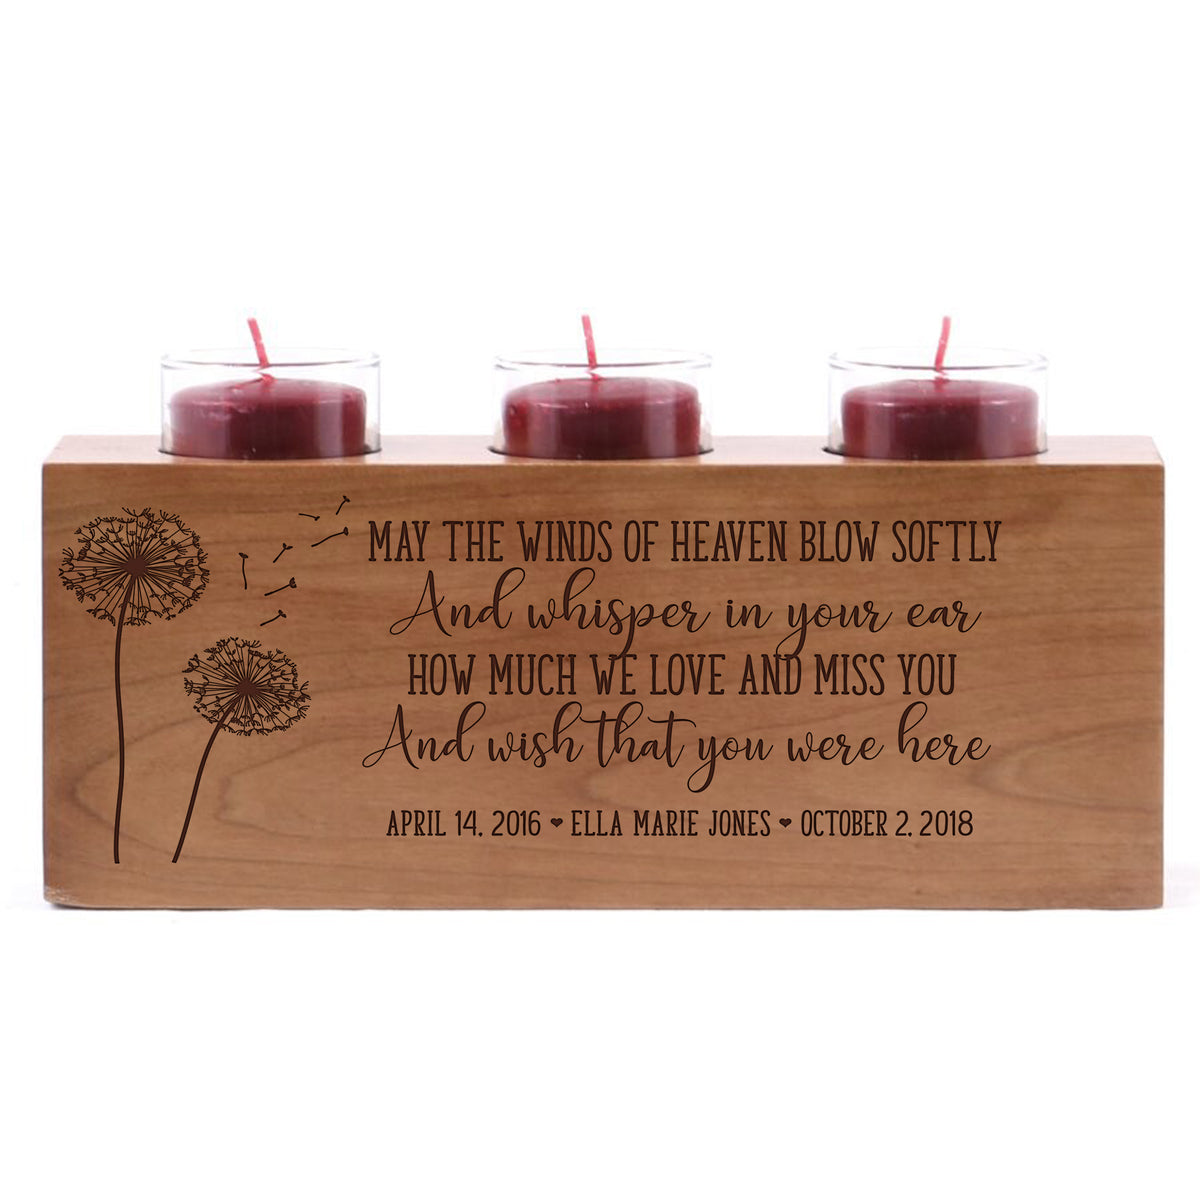 Personalized Baby Memorial sympathy candle holder custom engraved wood keepsake ideas for Loved One 10&quot; L x 4&quot; H by LifeSong Milestones